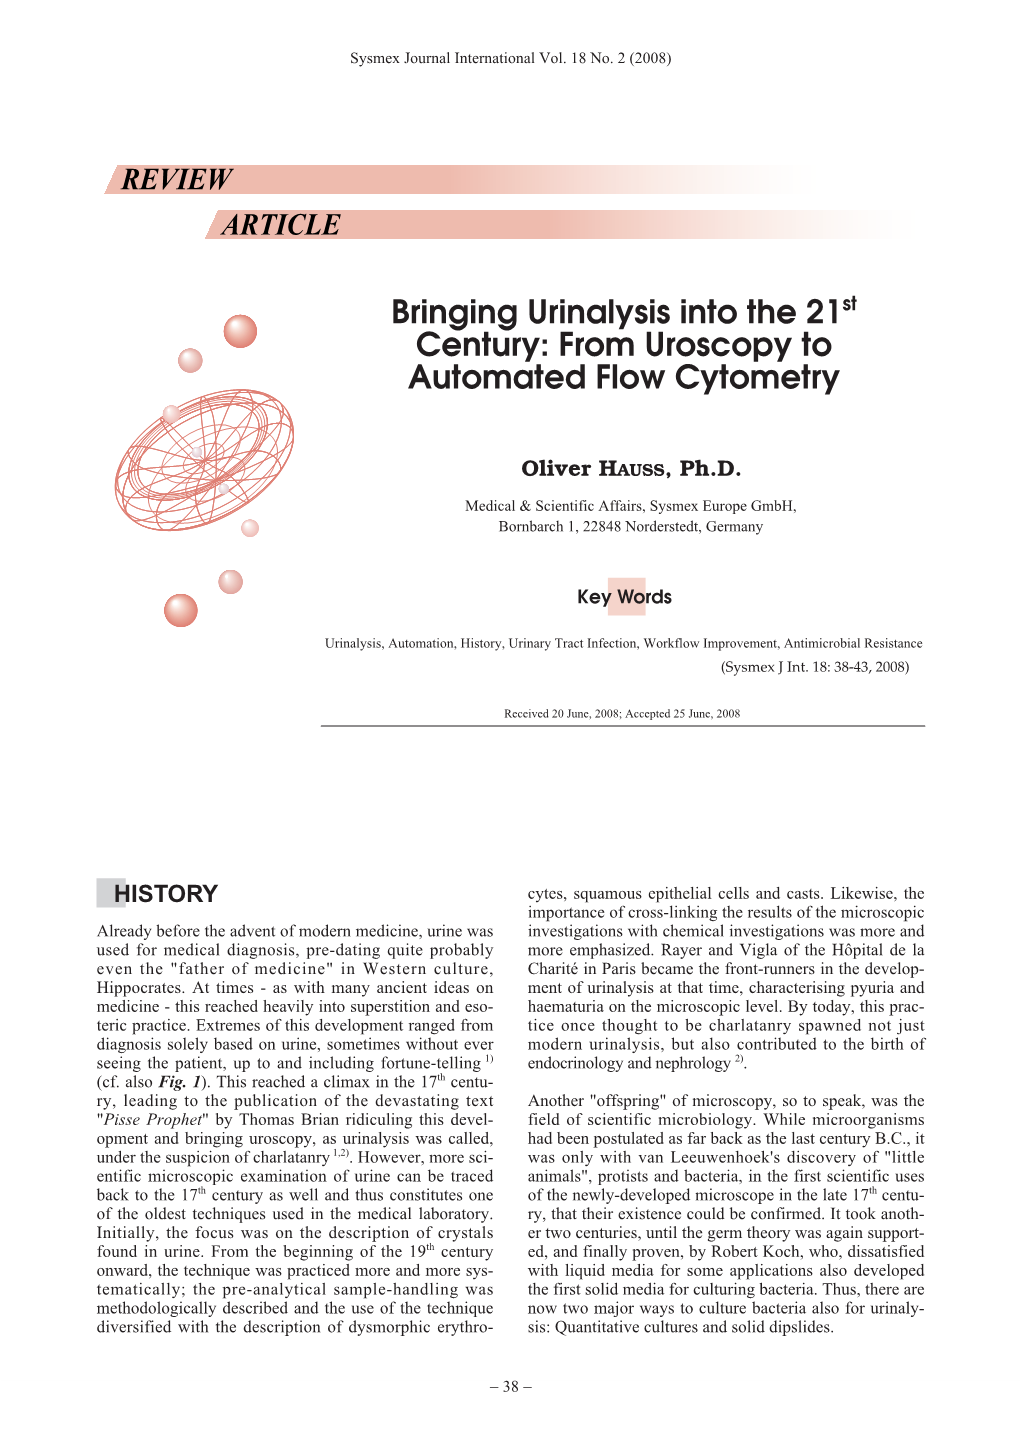 Bringing Urinalysis Into the 21St Century: from Uroscopy to Automated Flow Cytometry